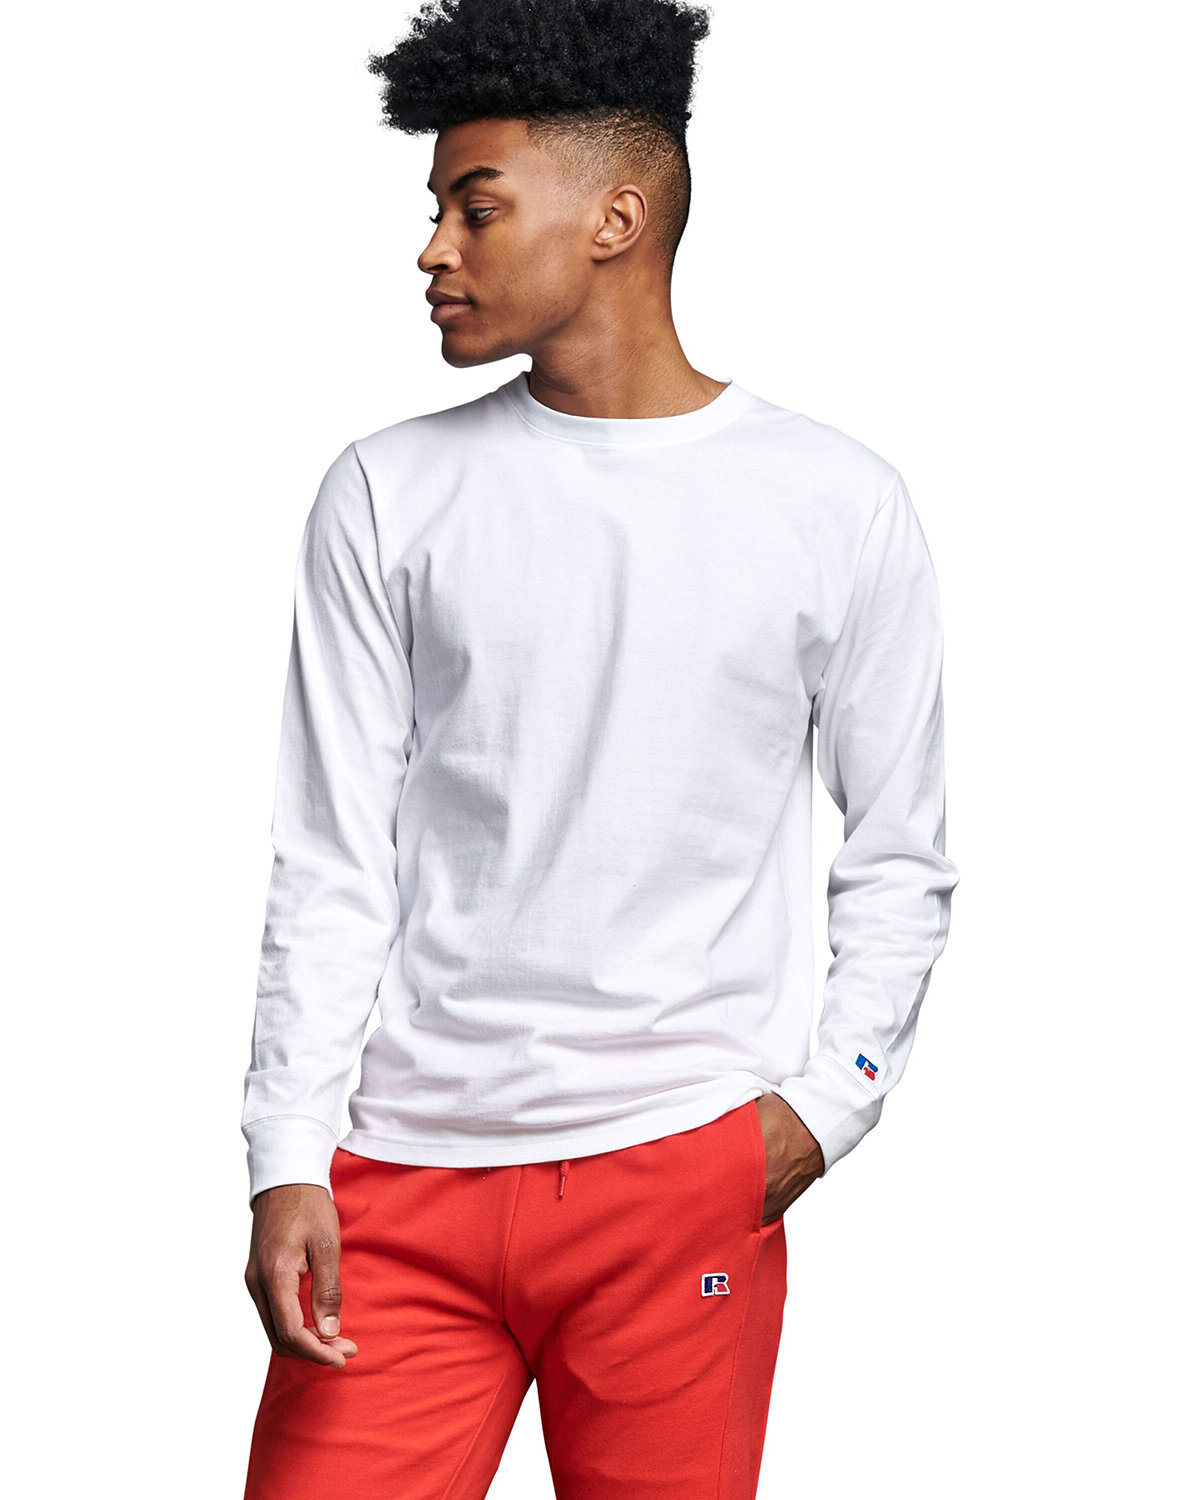 Russell Athletic Unisex Cotton Classic Long-Sleeve T-Shirt WHITE 